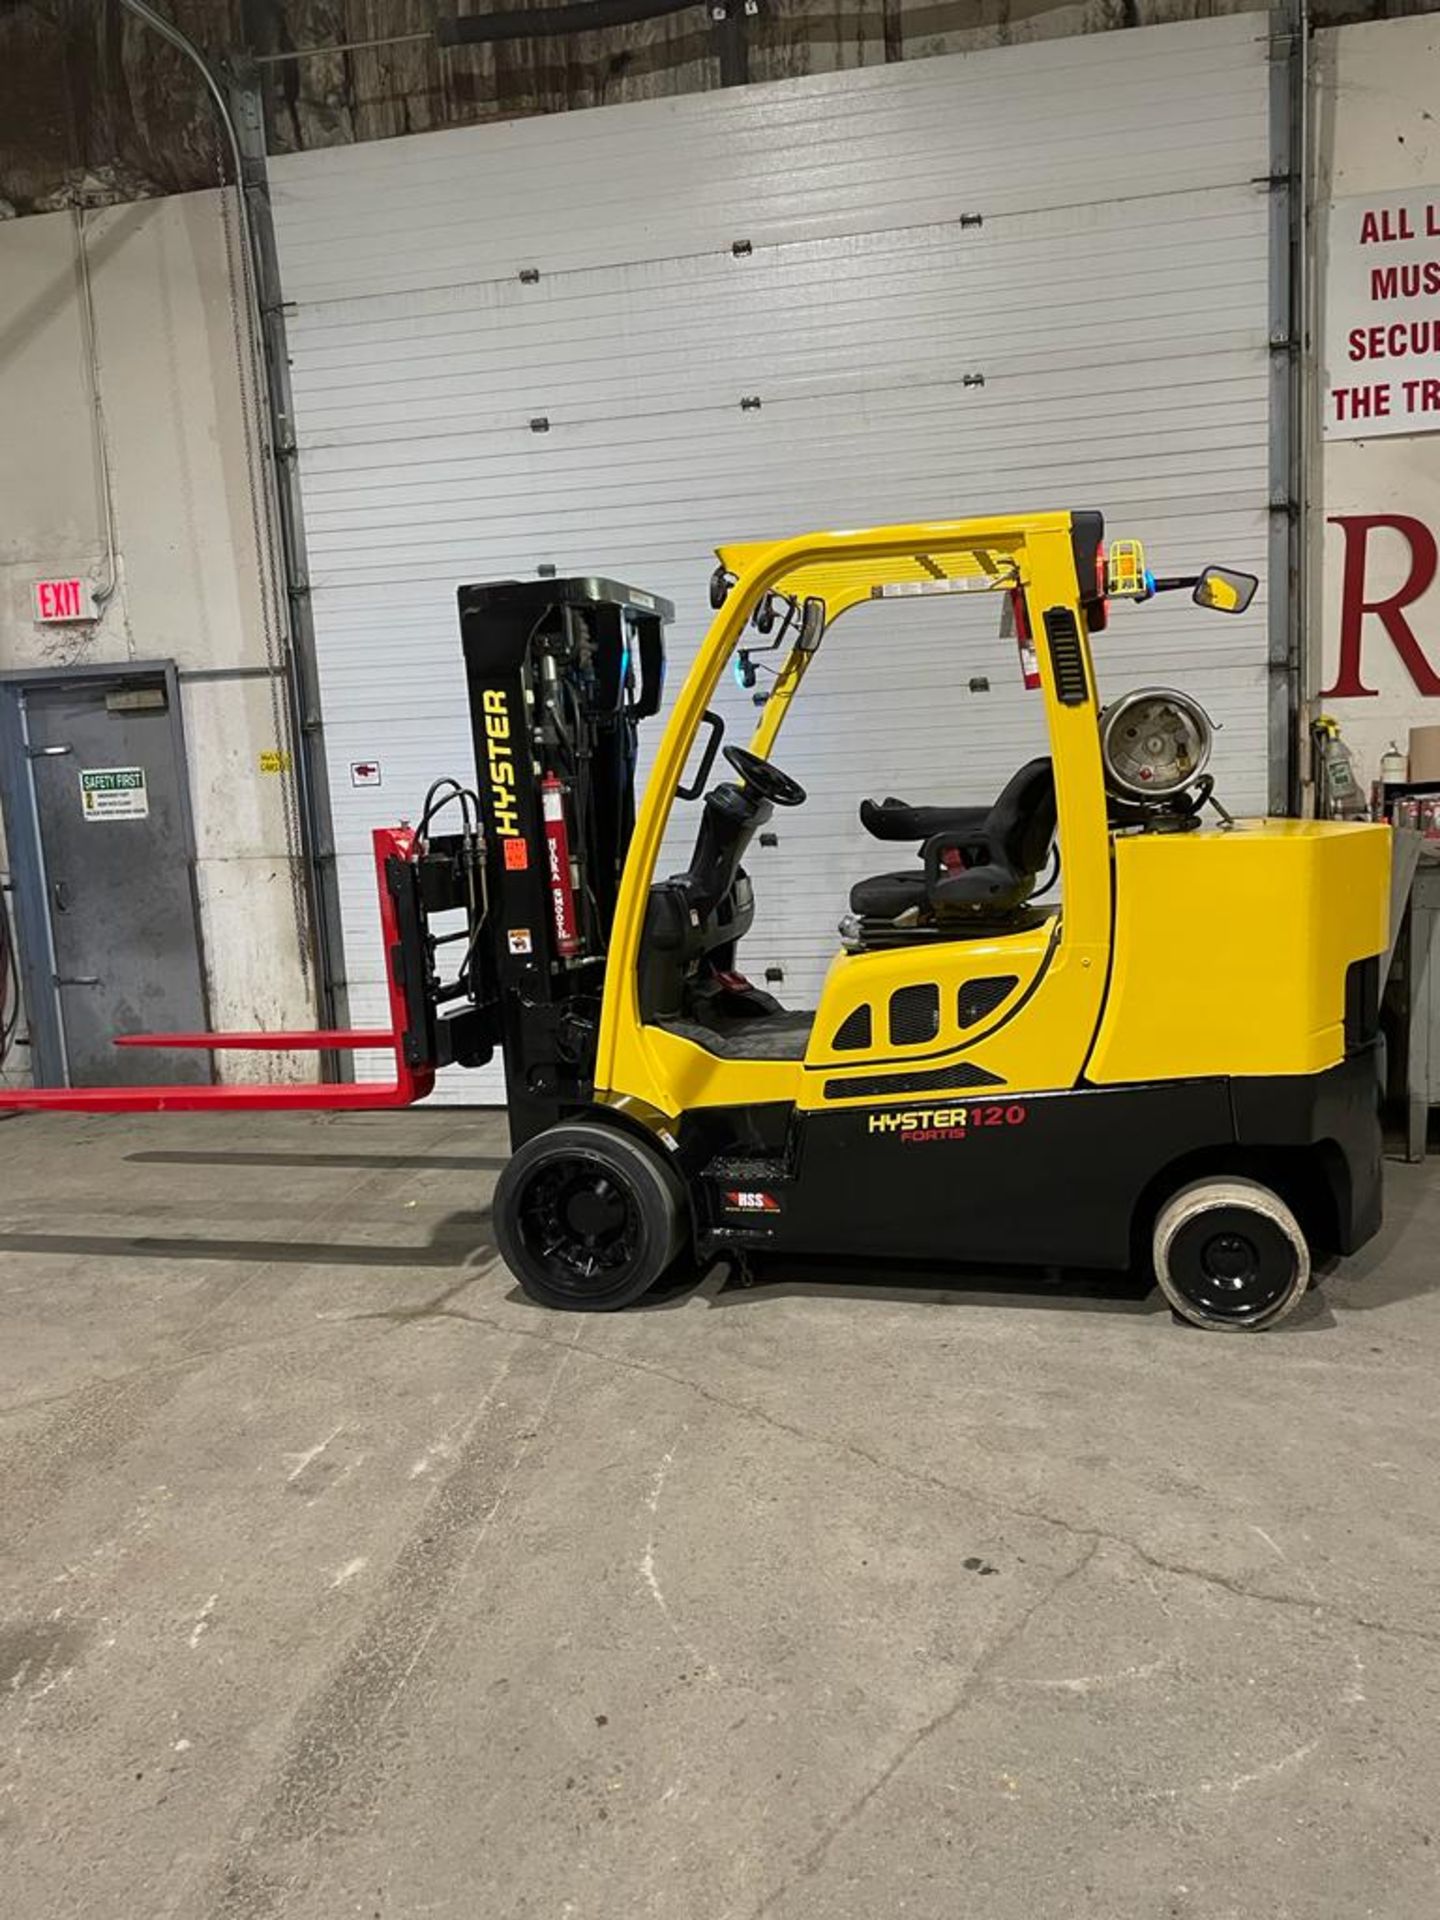 MINT ** 2017 Hyster 120 - 12,000lbs Capacity Forklift 72" Forks with sideshift & Fork Positioner -